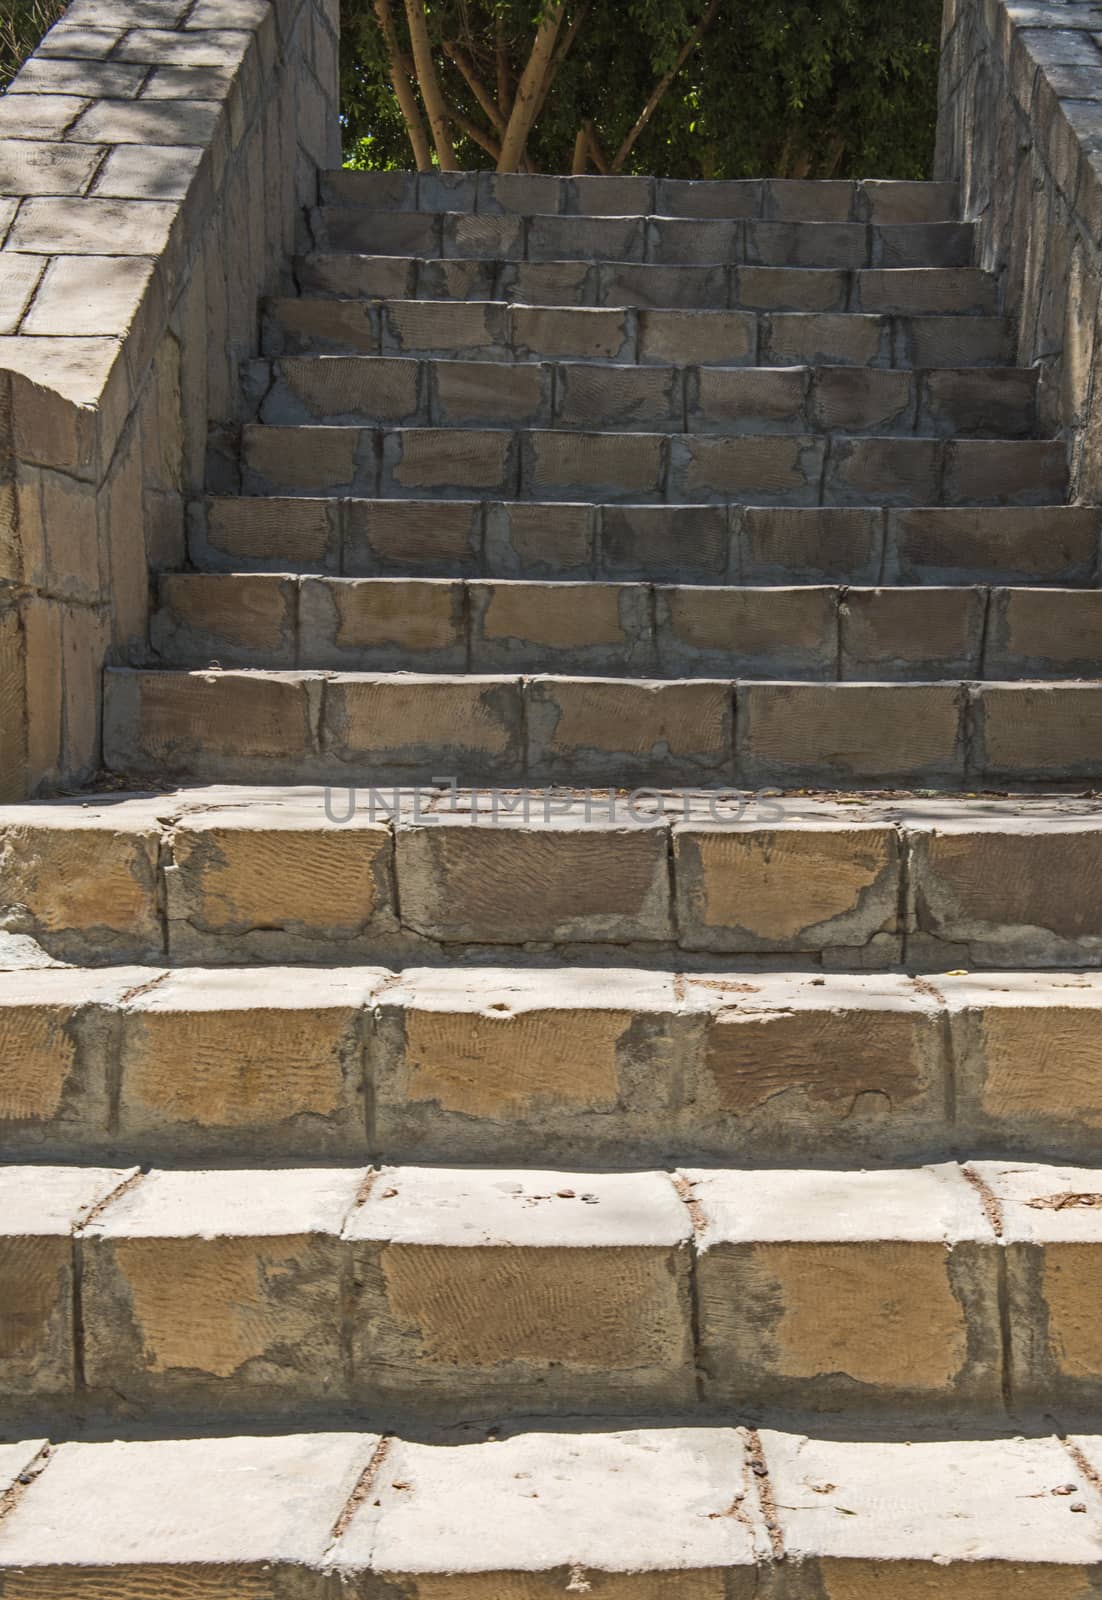 Closeup detail of stone paved steps on rural footpath walkway going upwards in formal garden grounds